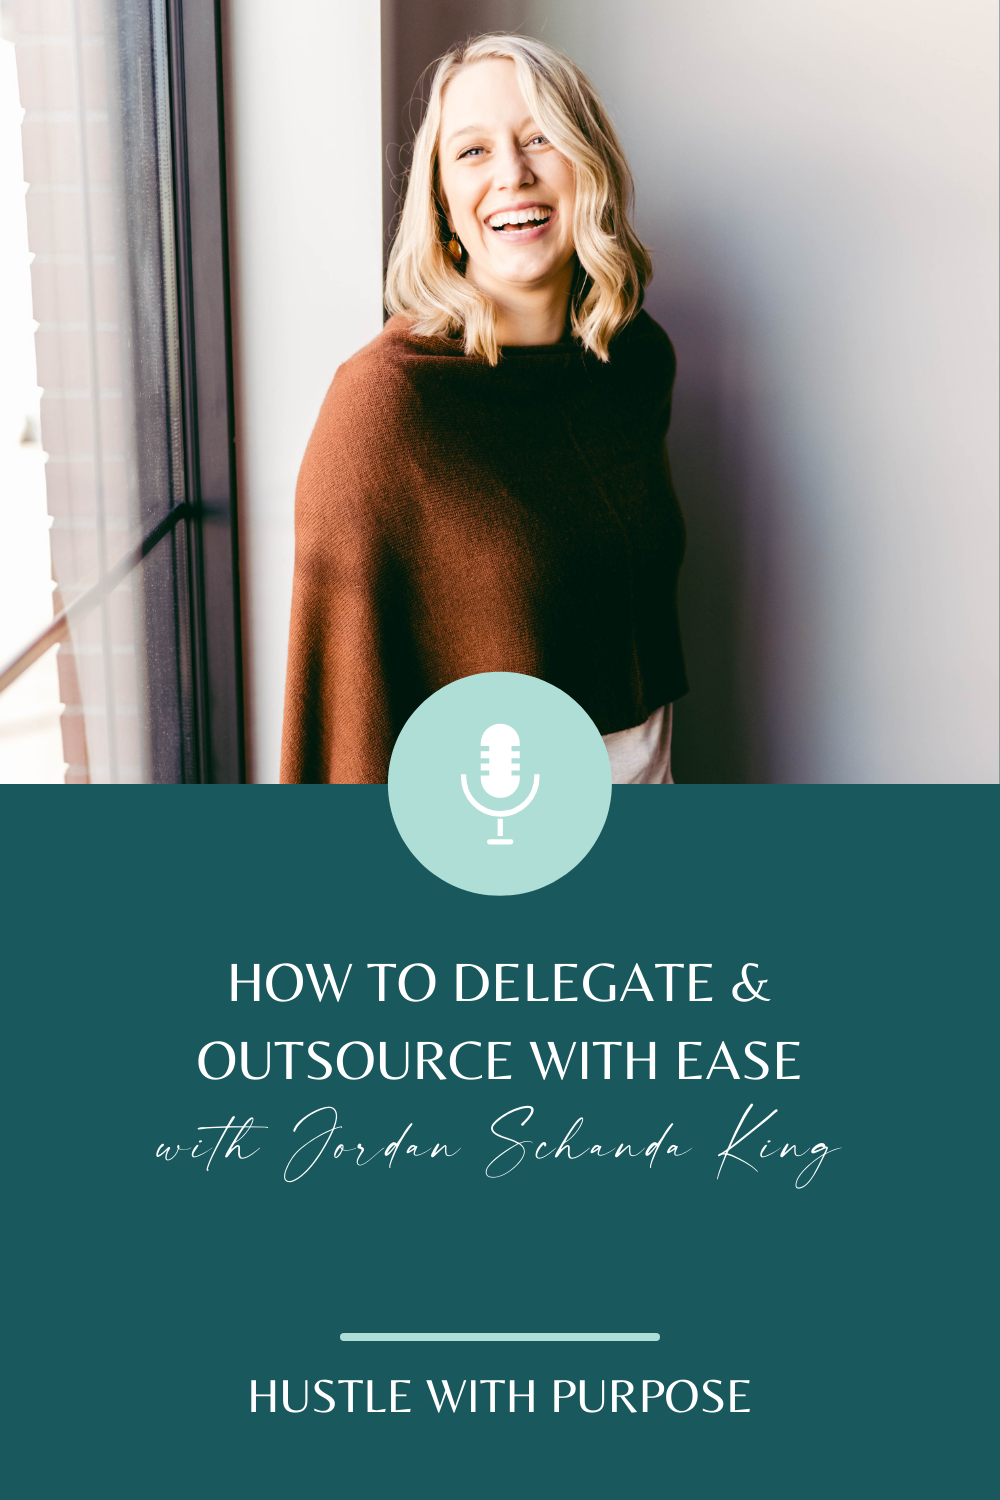 How to Delegate and Outsource with Ease with Jordan Schanda King